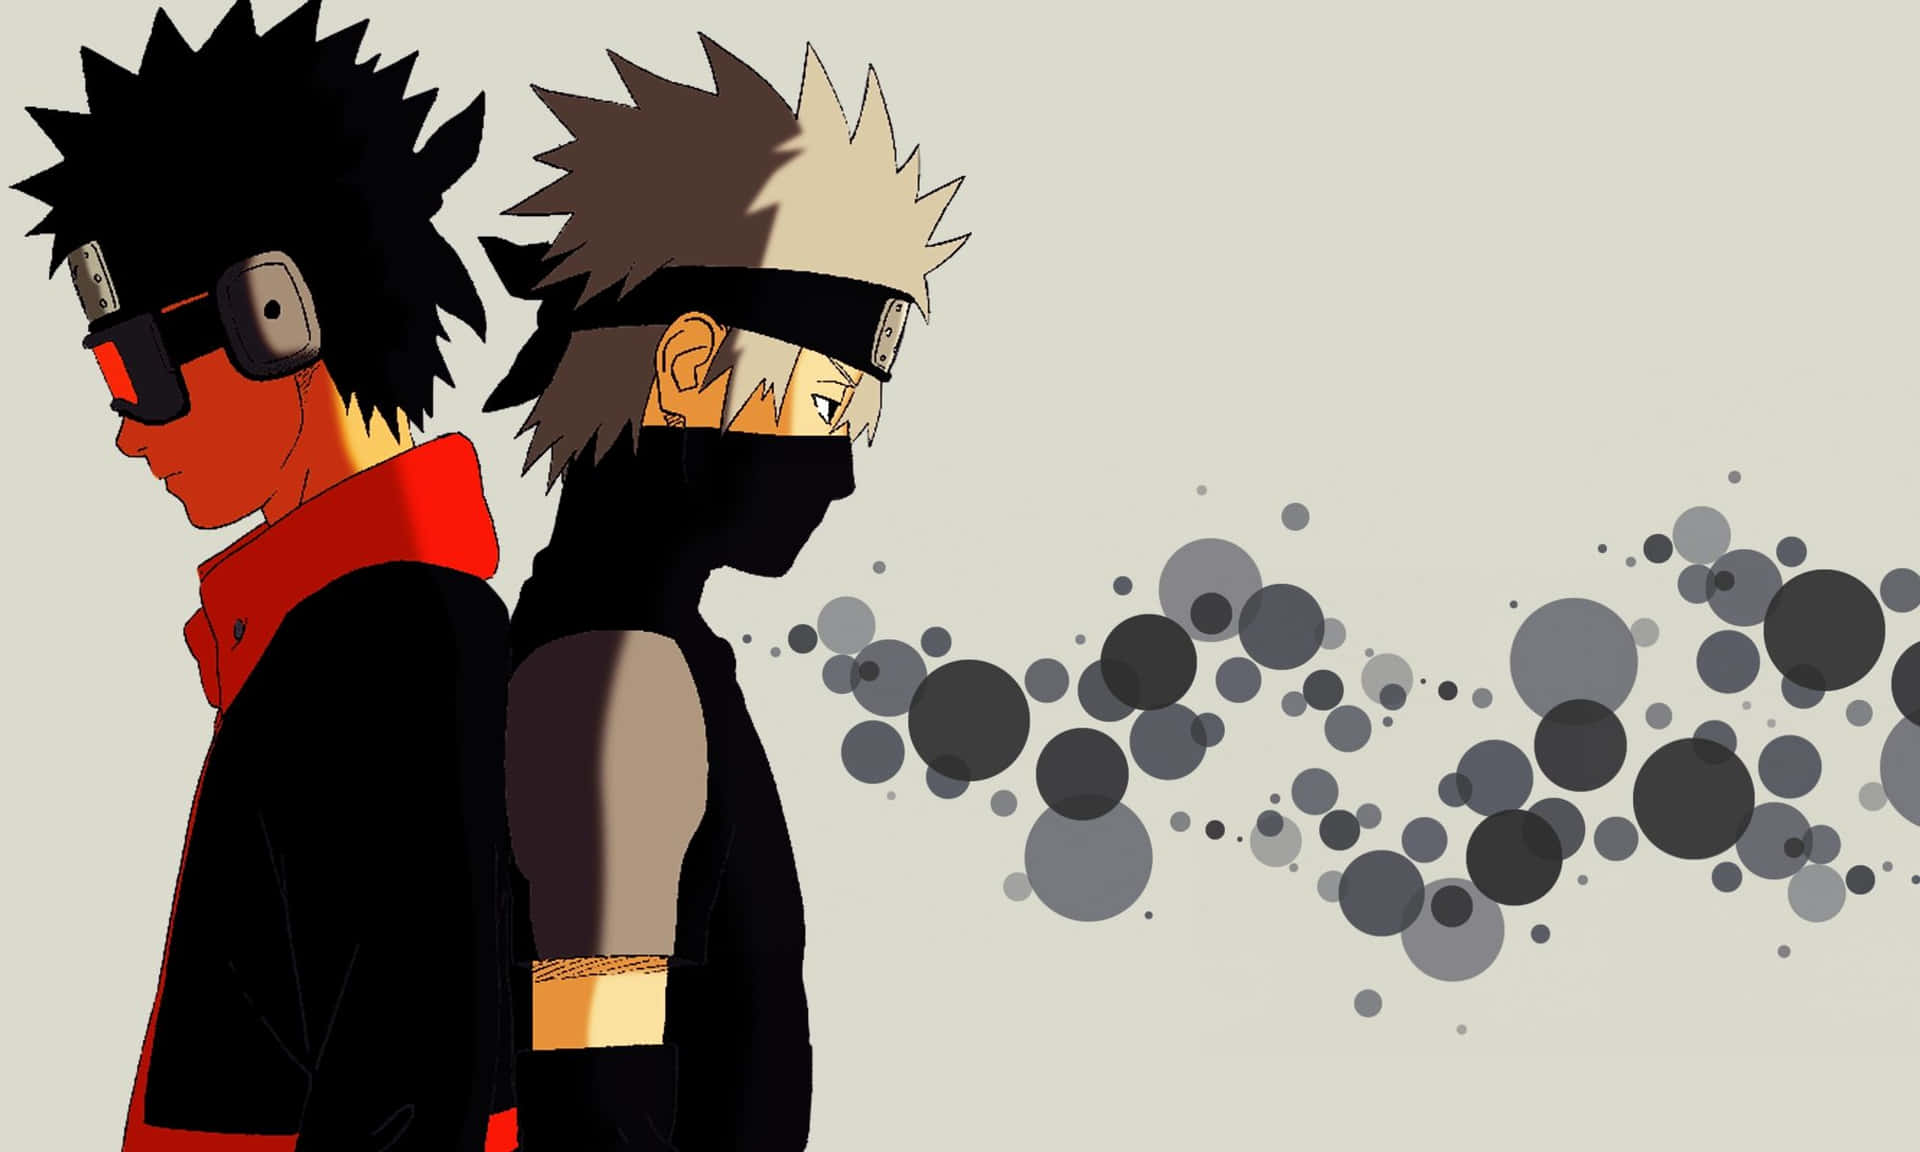 Obito and Kakashi, best friends in life and in death. Wallpaper